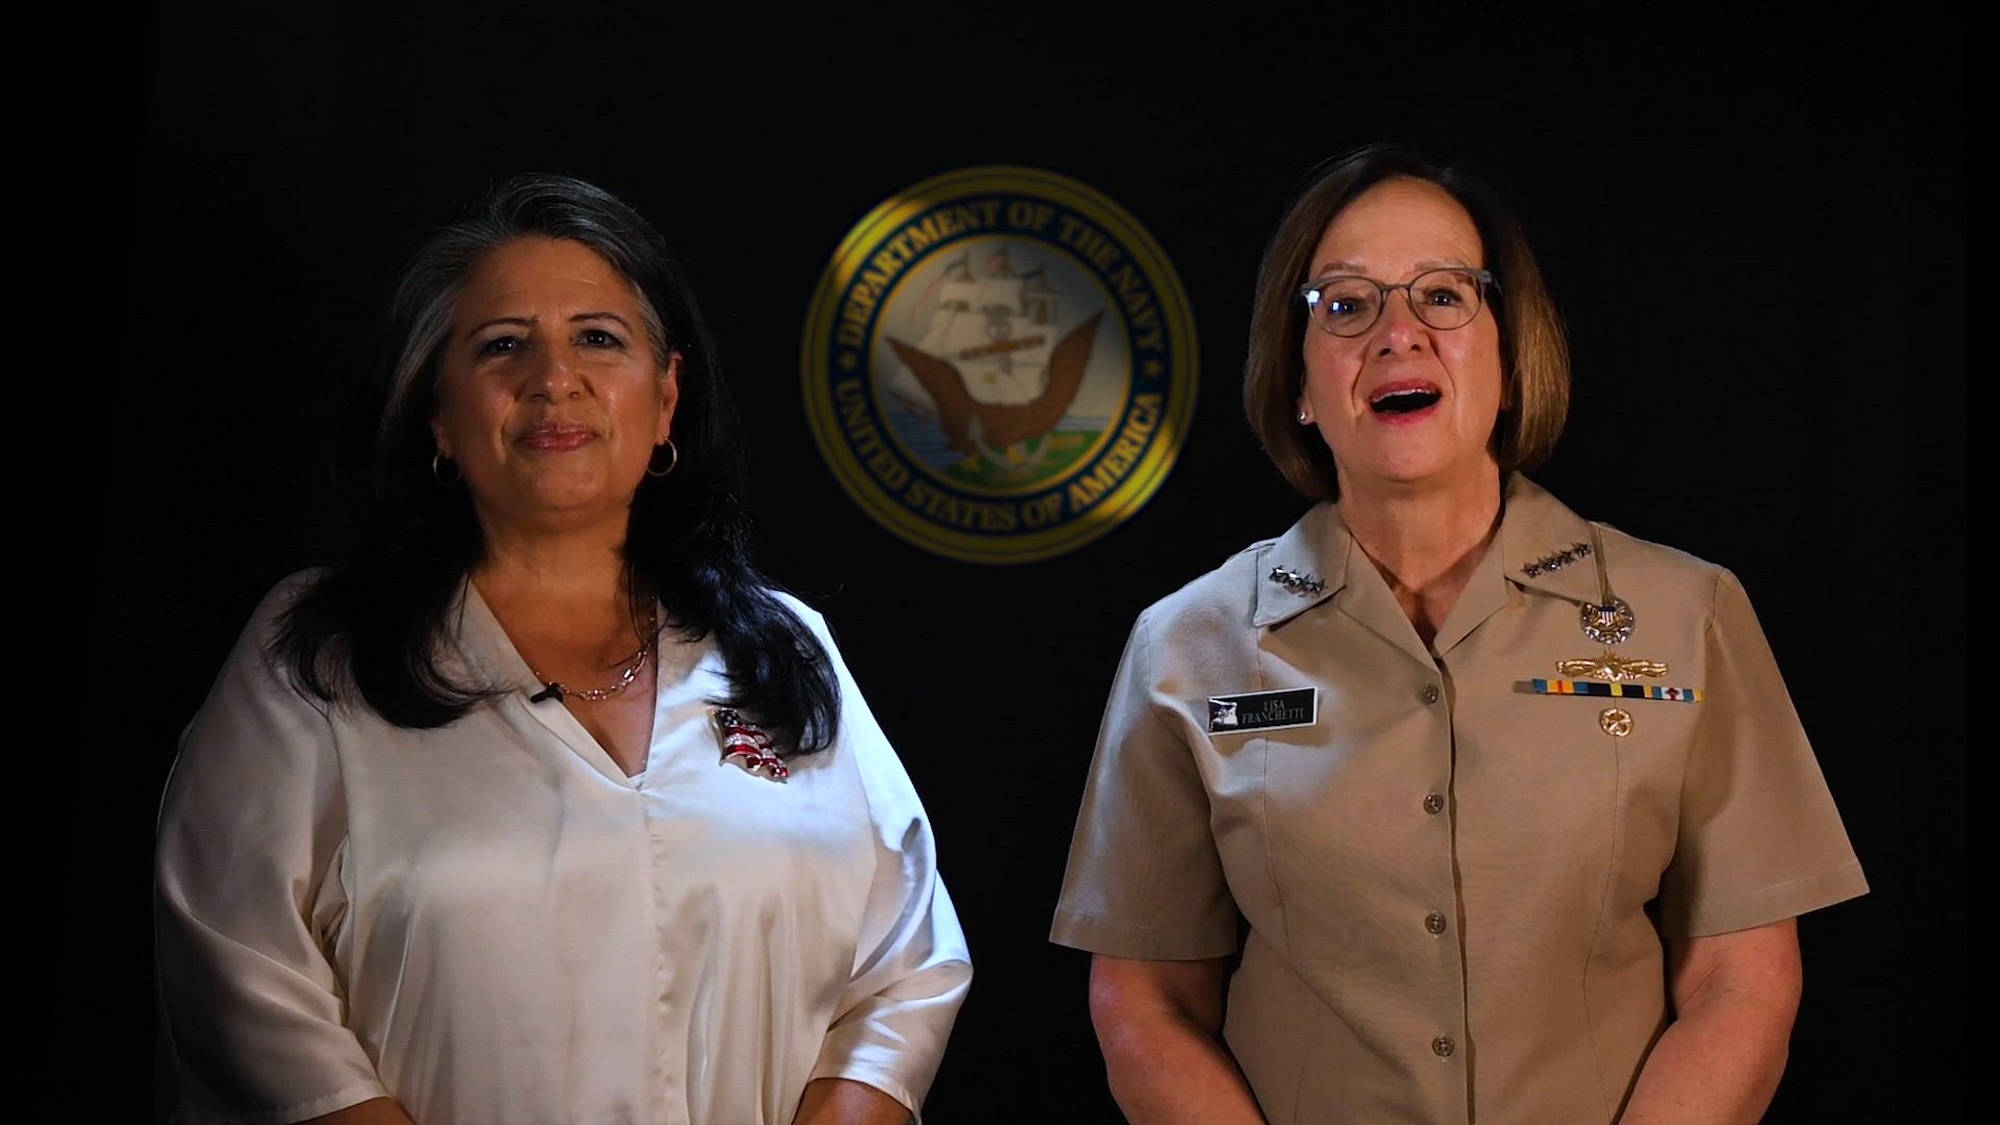 Chief of Naval Operations Adm. Lisa Franchetti and Ombudsman-at-Large Evenlyn Honea recognize and celebrate the contributions of military families.